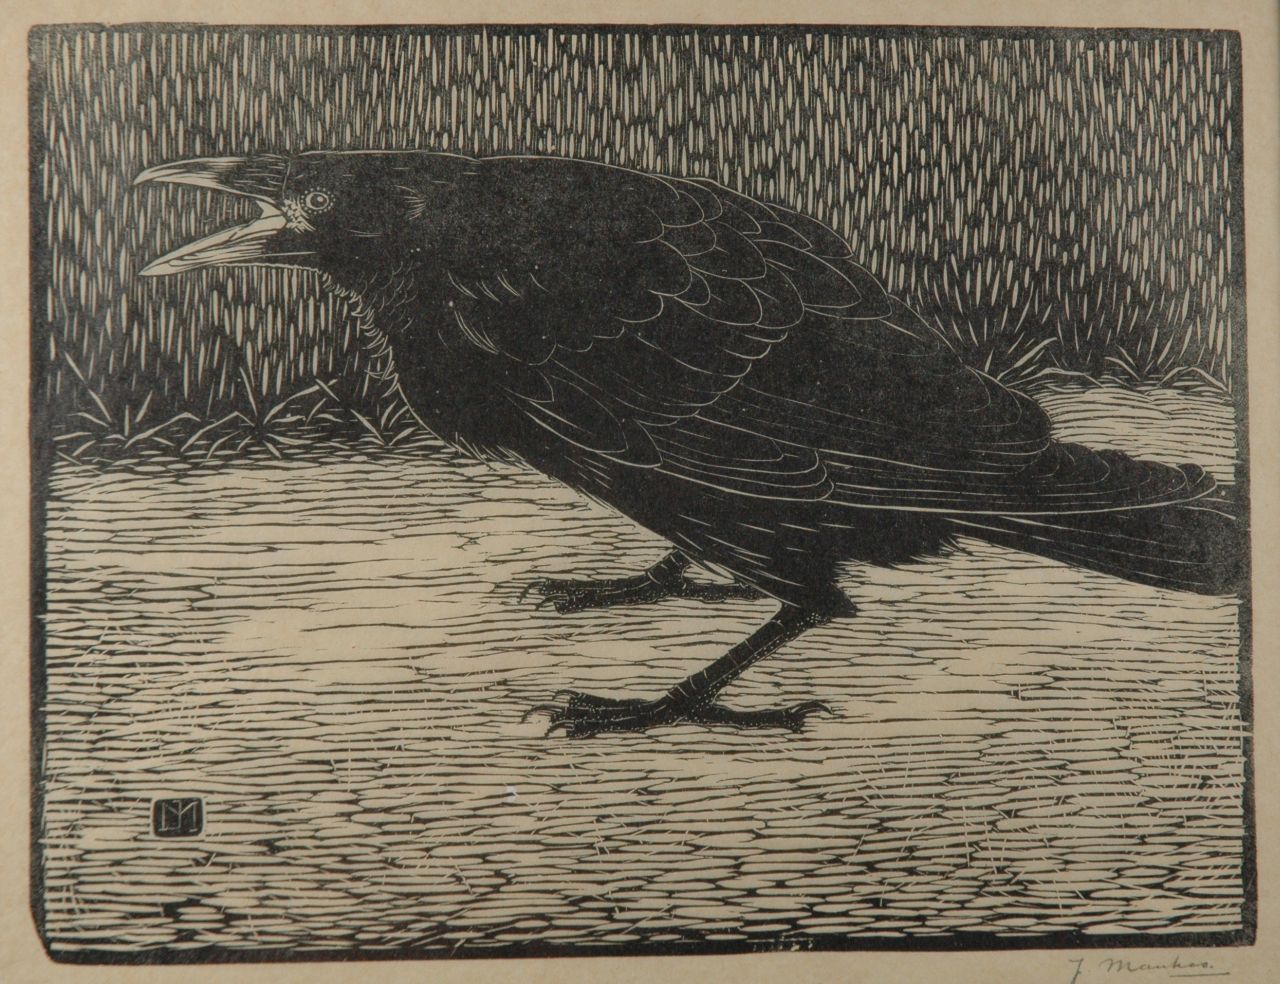 Mankes J.  | Jan Mankes, Screaming crow, Holzstich auf Papier 18,3 x 23,8 cm, signed l.r. in full (in pencil) and with mon. in the bloc und executed in 1918